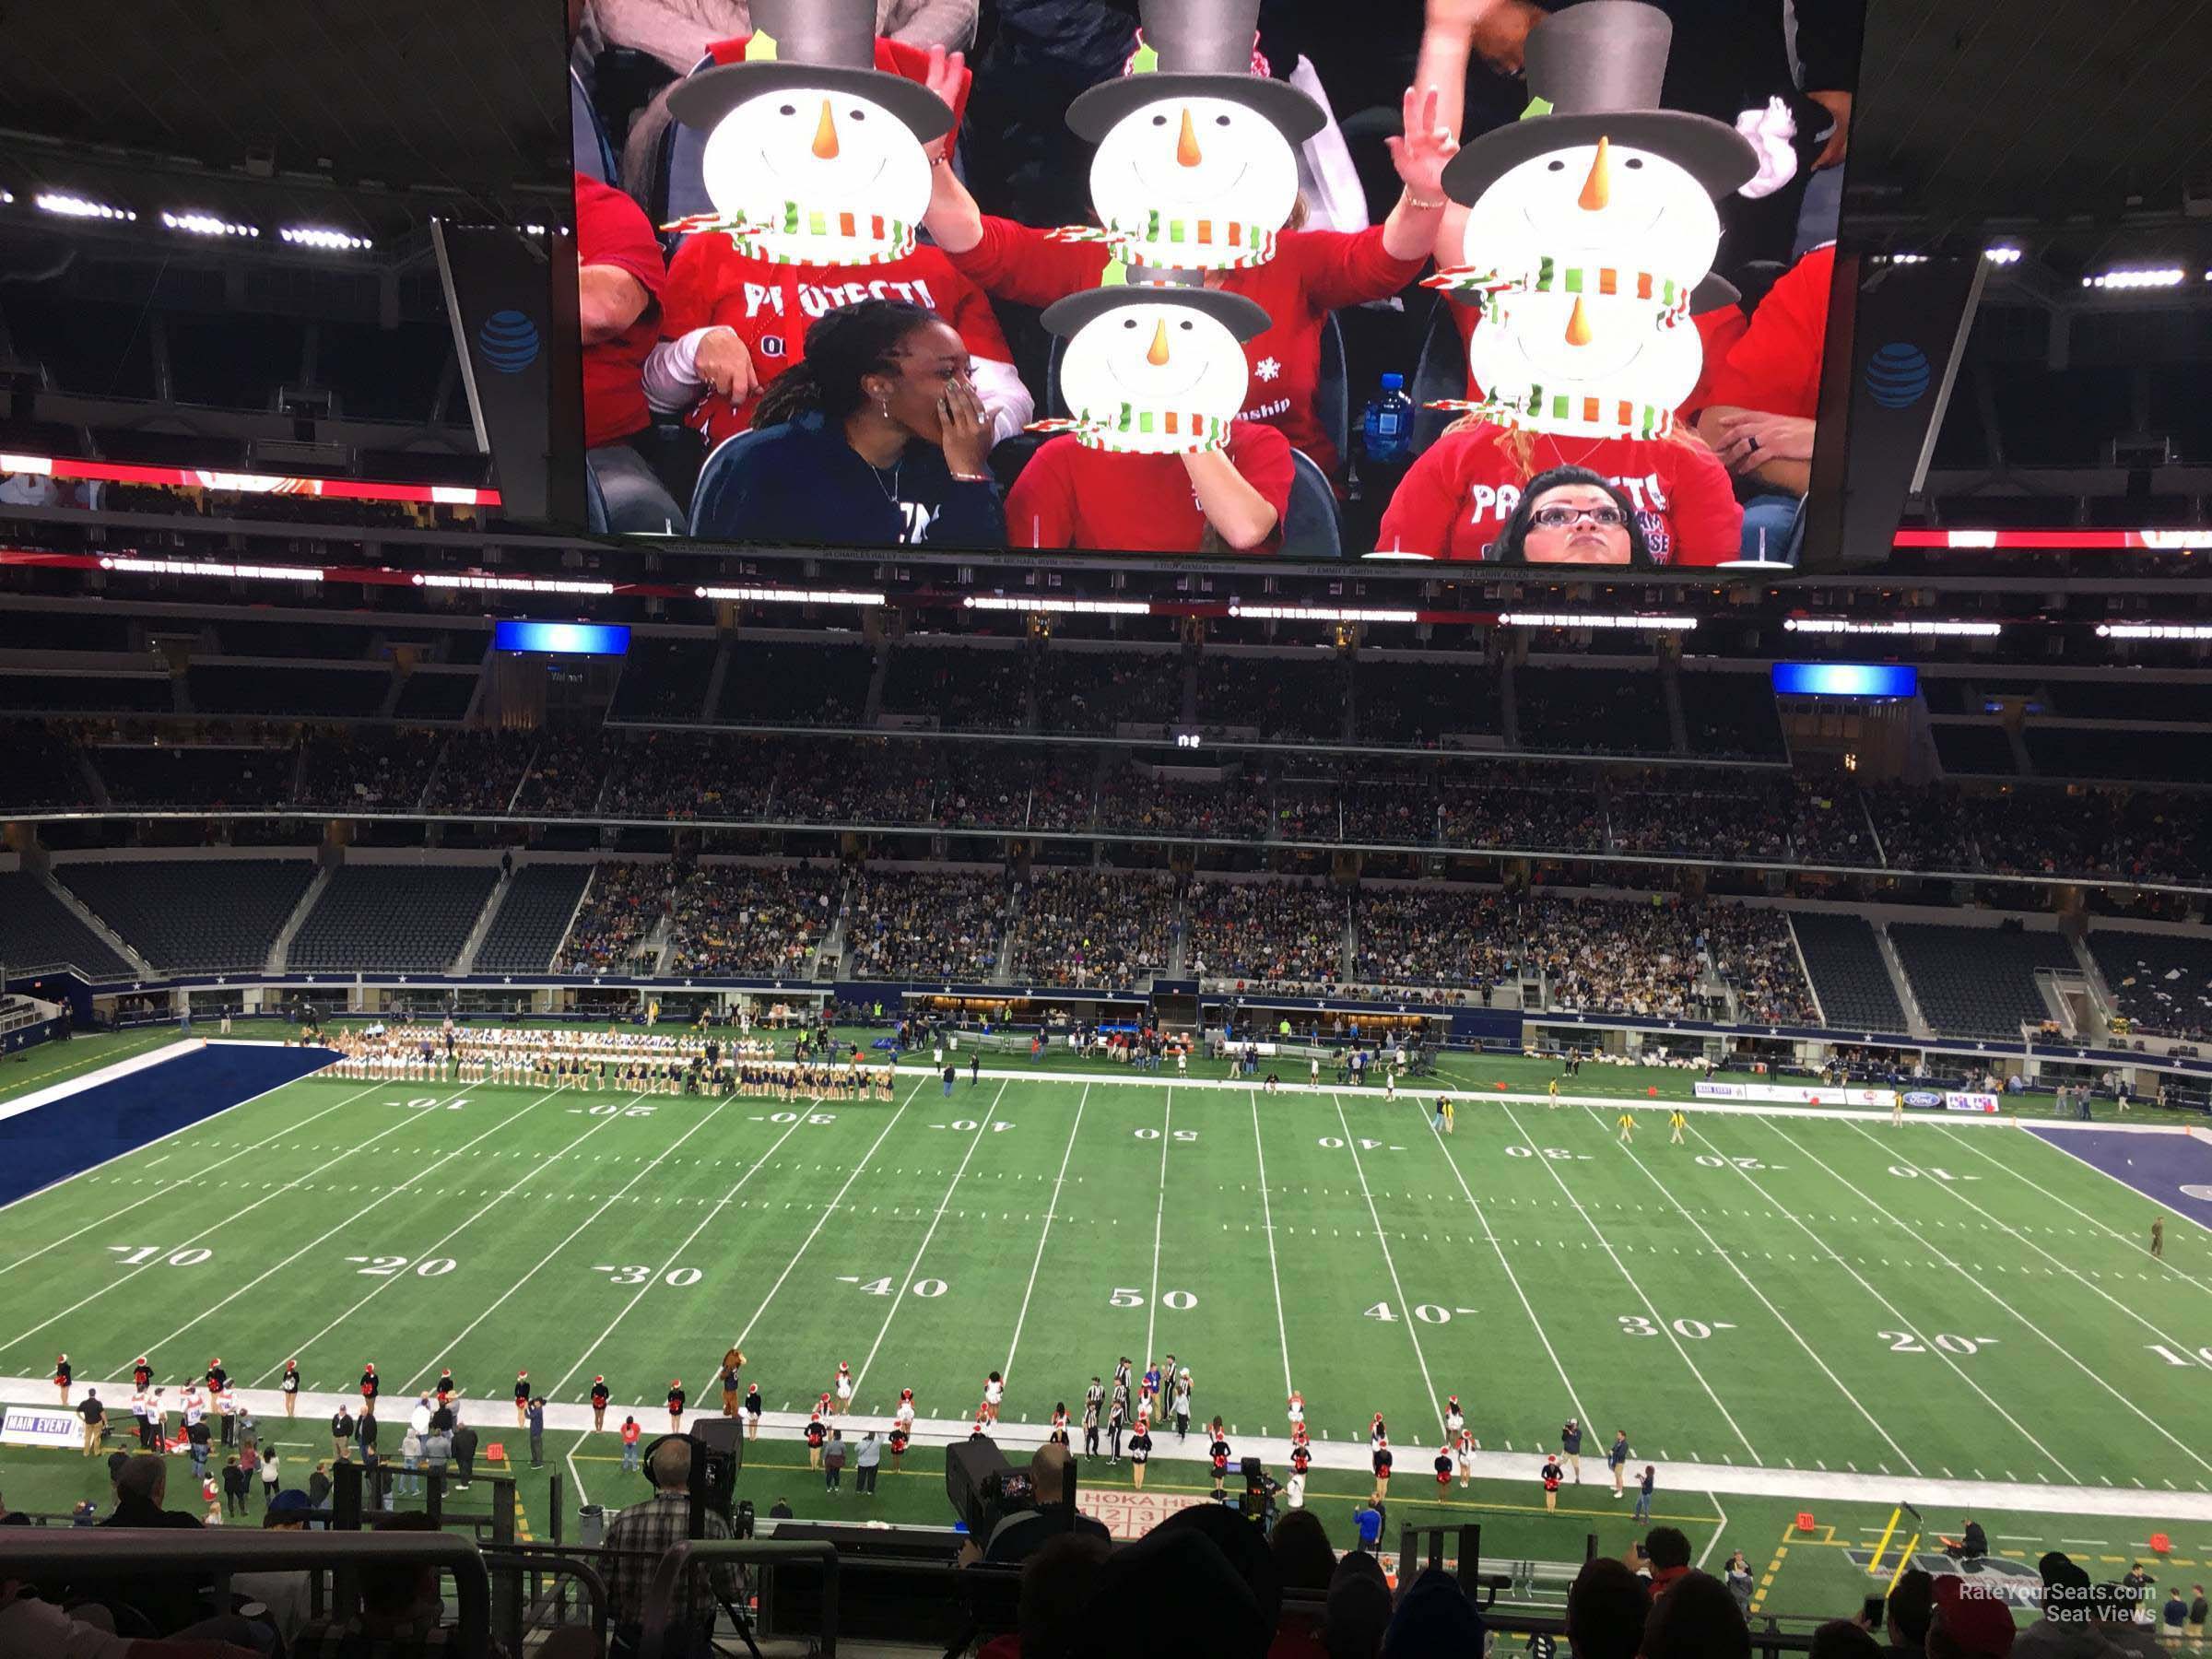 section c310, row 10 seat view  for football - at&t stadium (cowboys stadium)